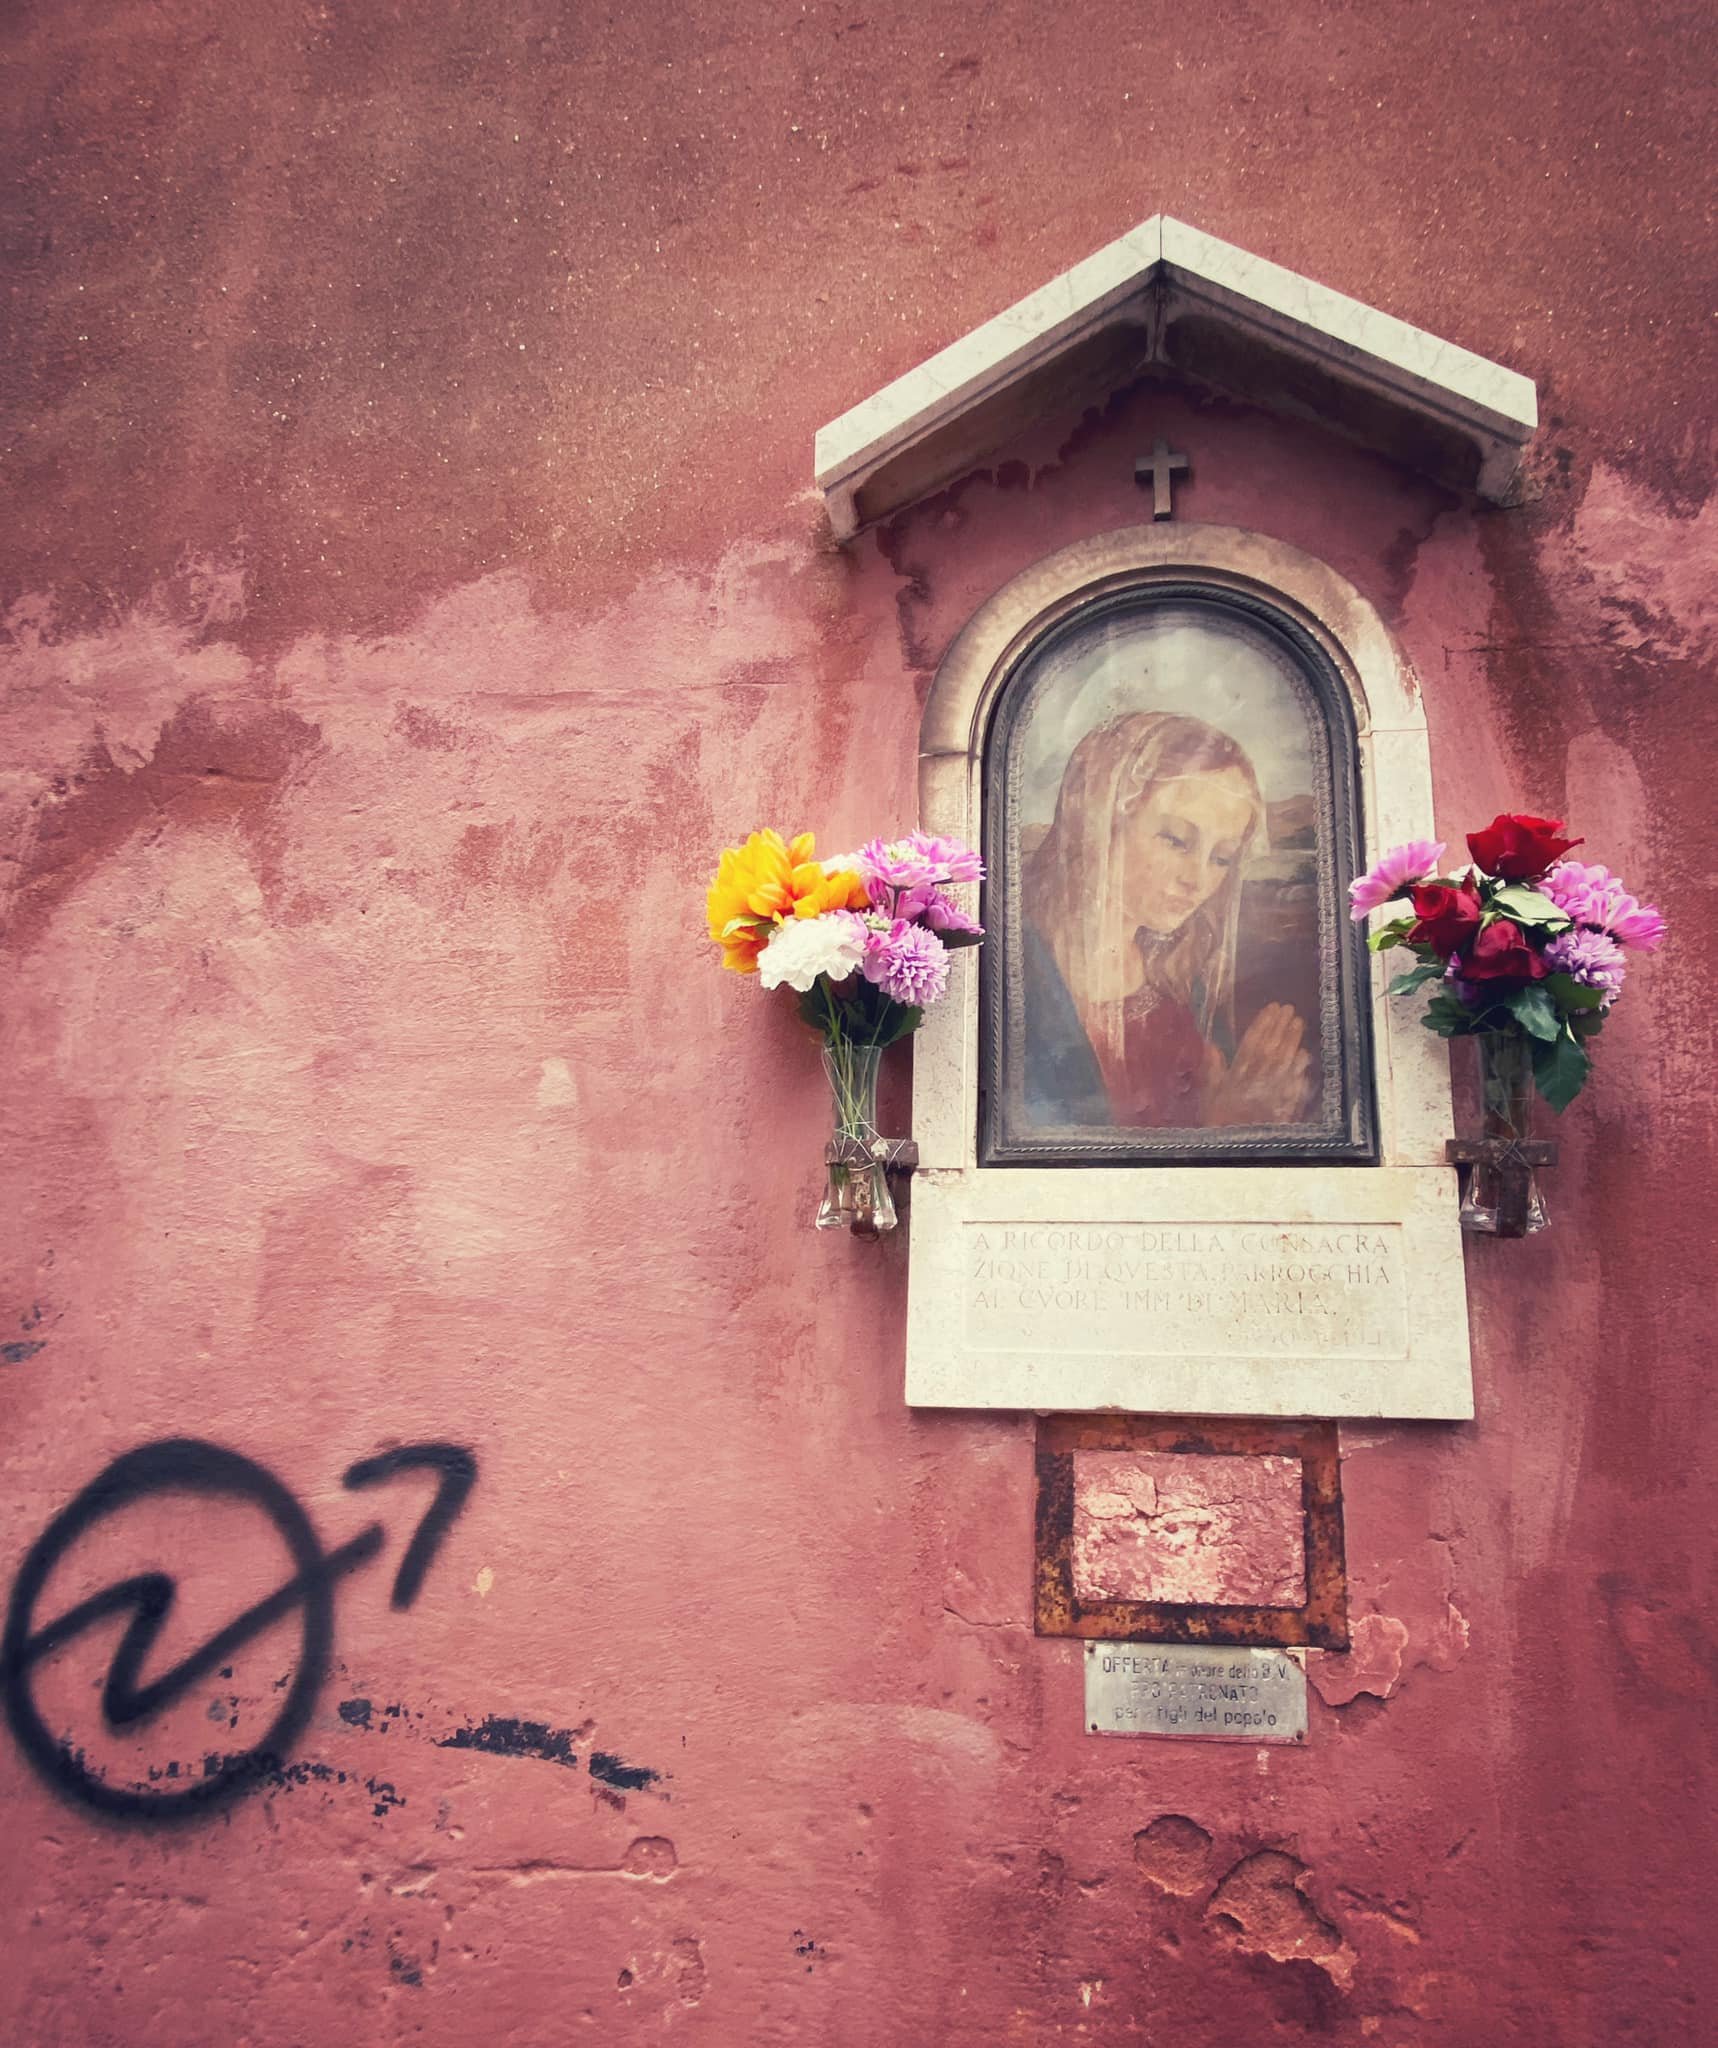  Venice in a picture: both sacred and profane. 